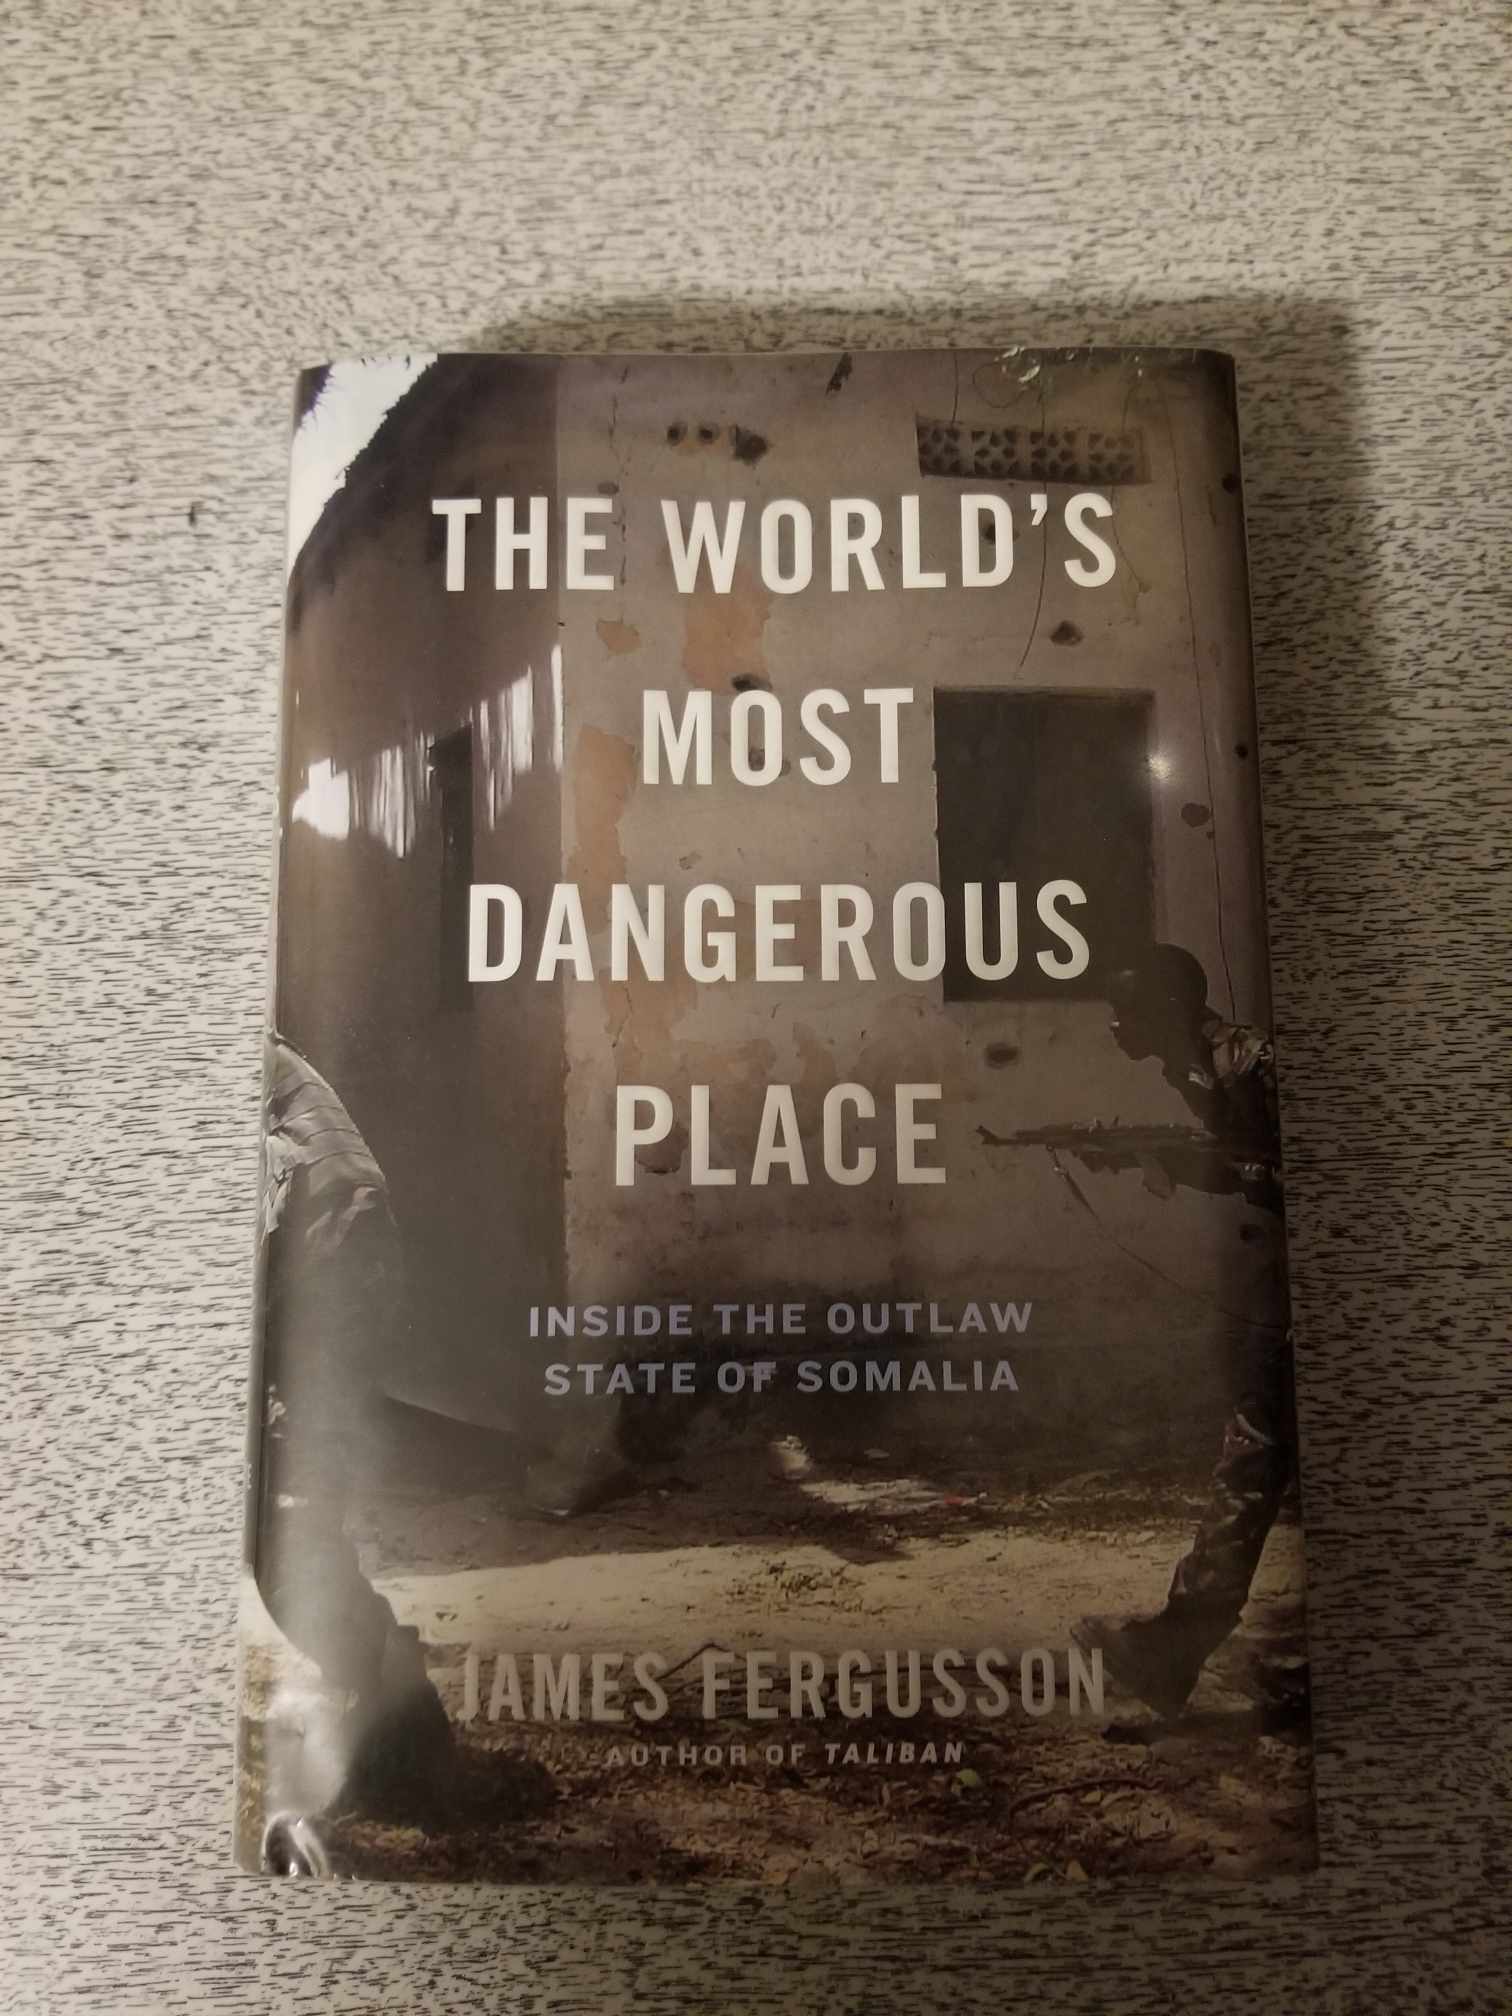 The World's Most Dangerous Place by James Fergusson